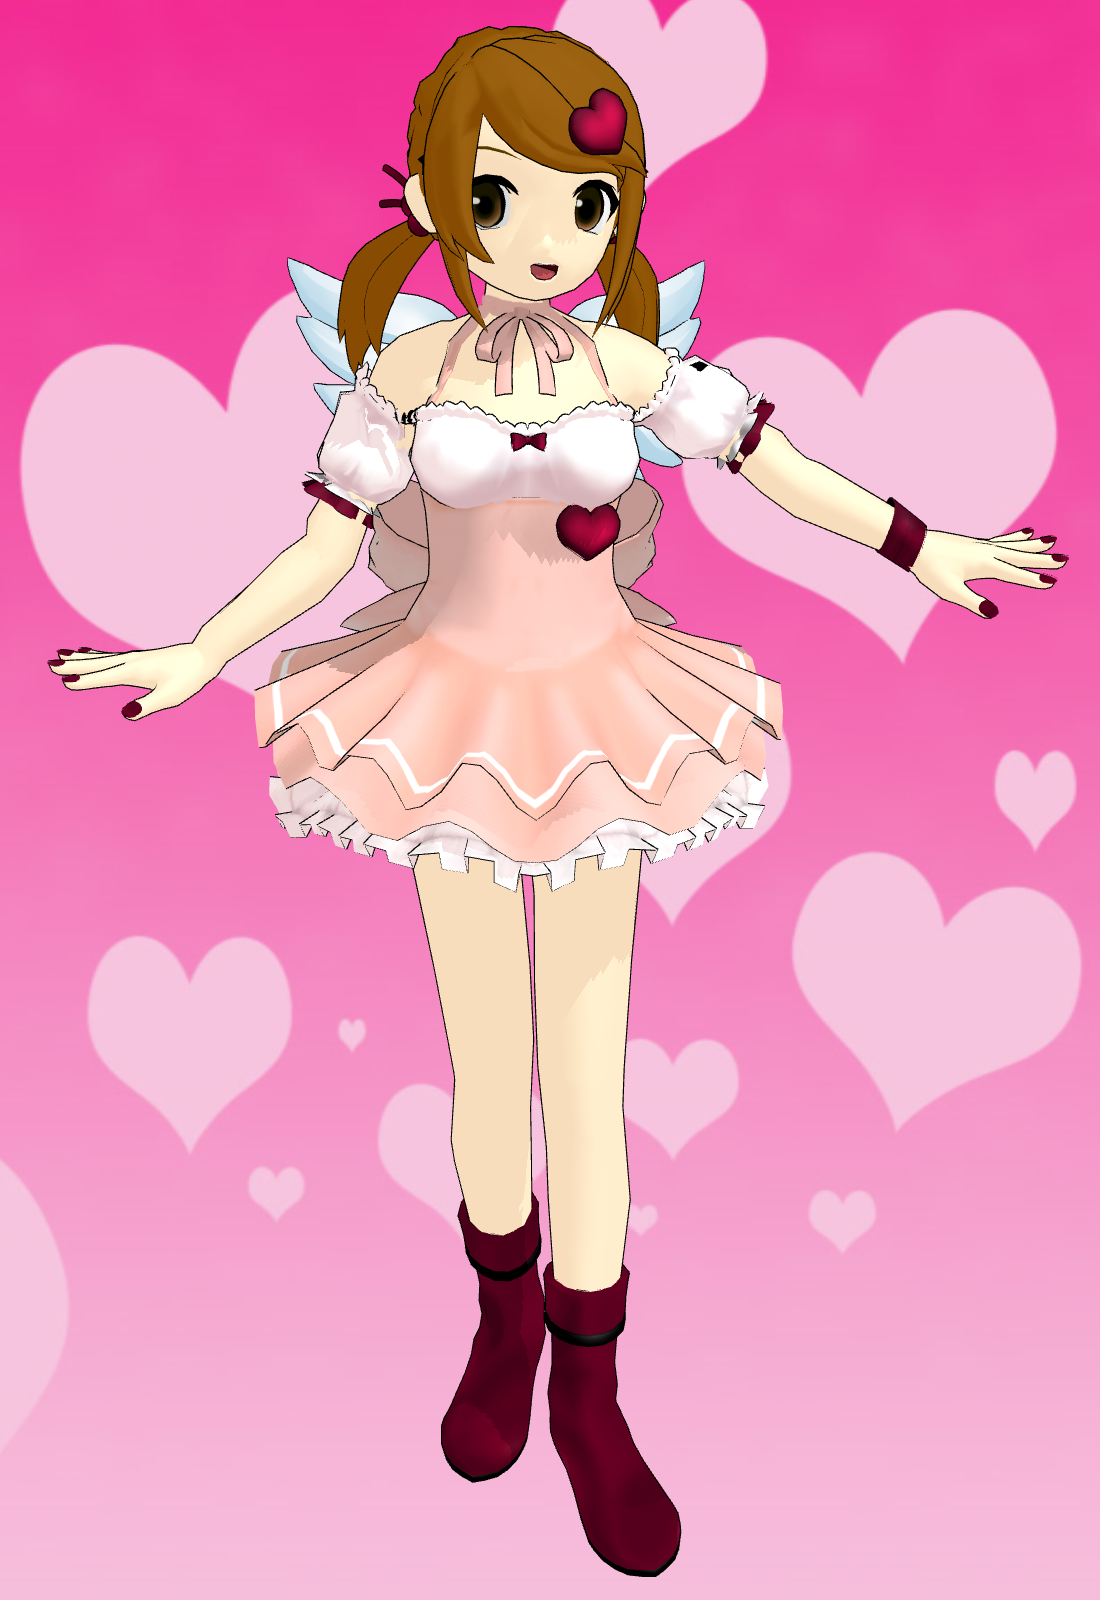 mmd_happy_valentines_day_cupid_brsa_by_brsa-d4pq97a.png (1100×1600)